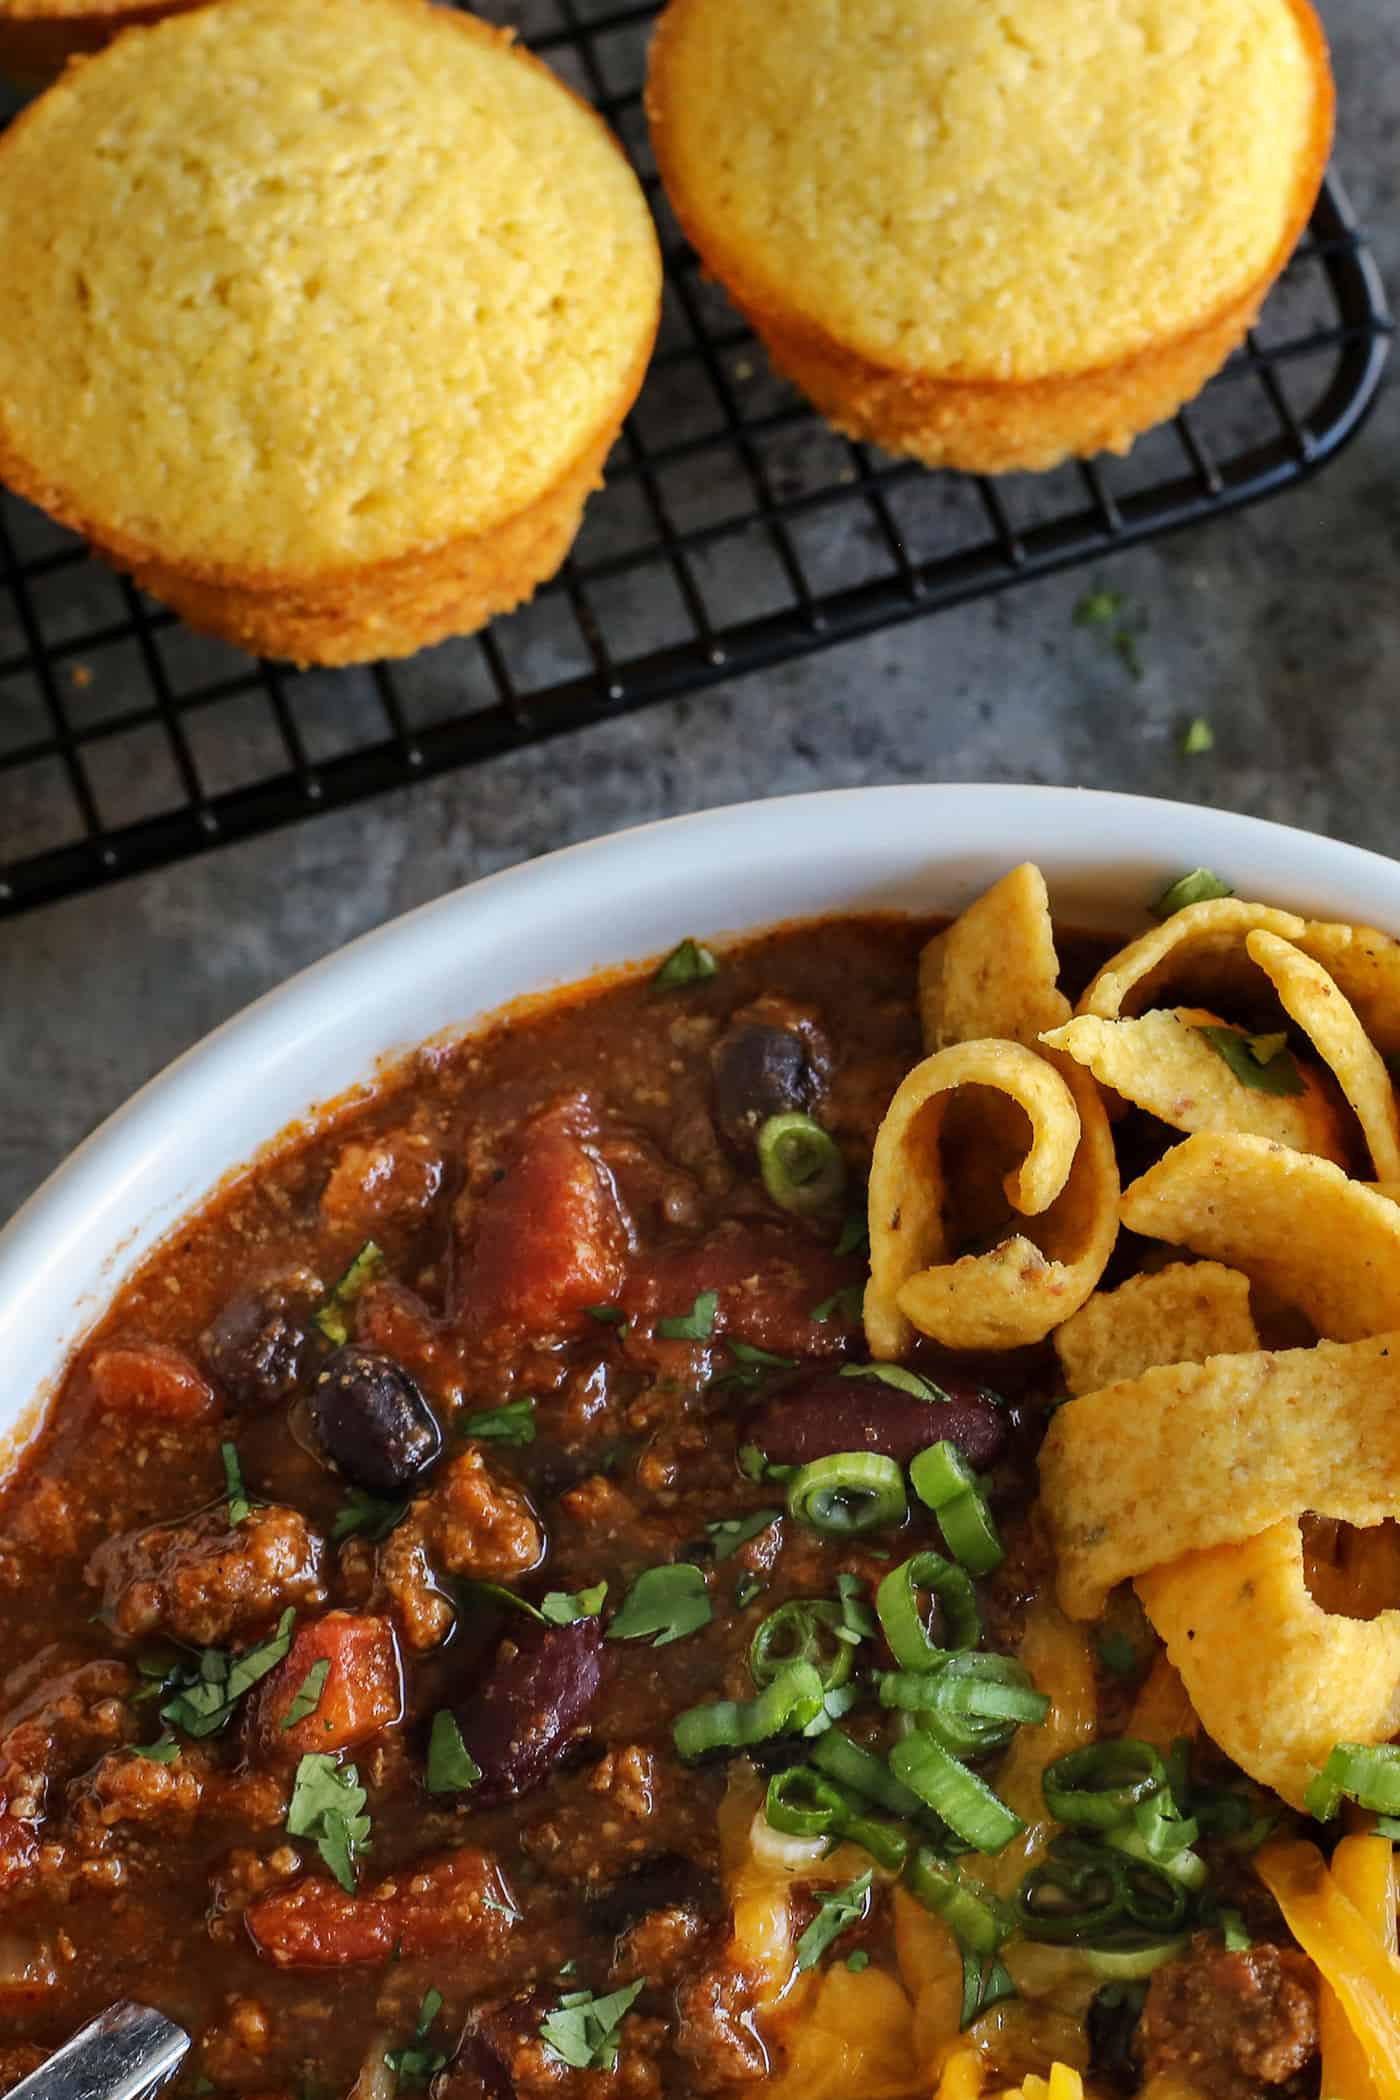 A bowl of slow cooker chili near some cornbread muffins